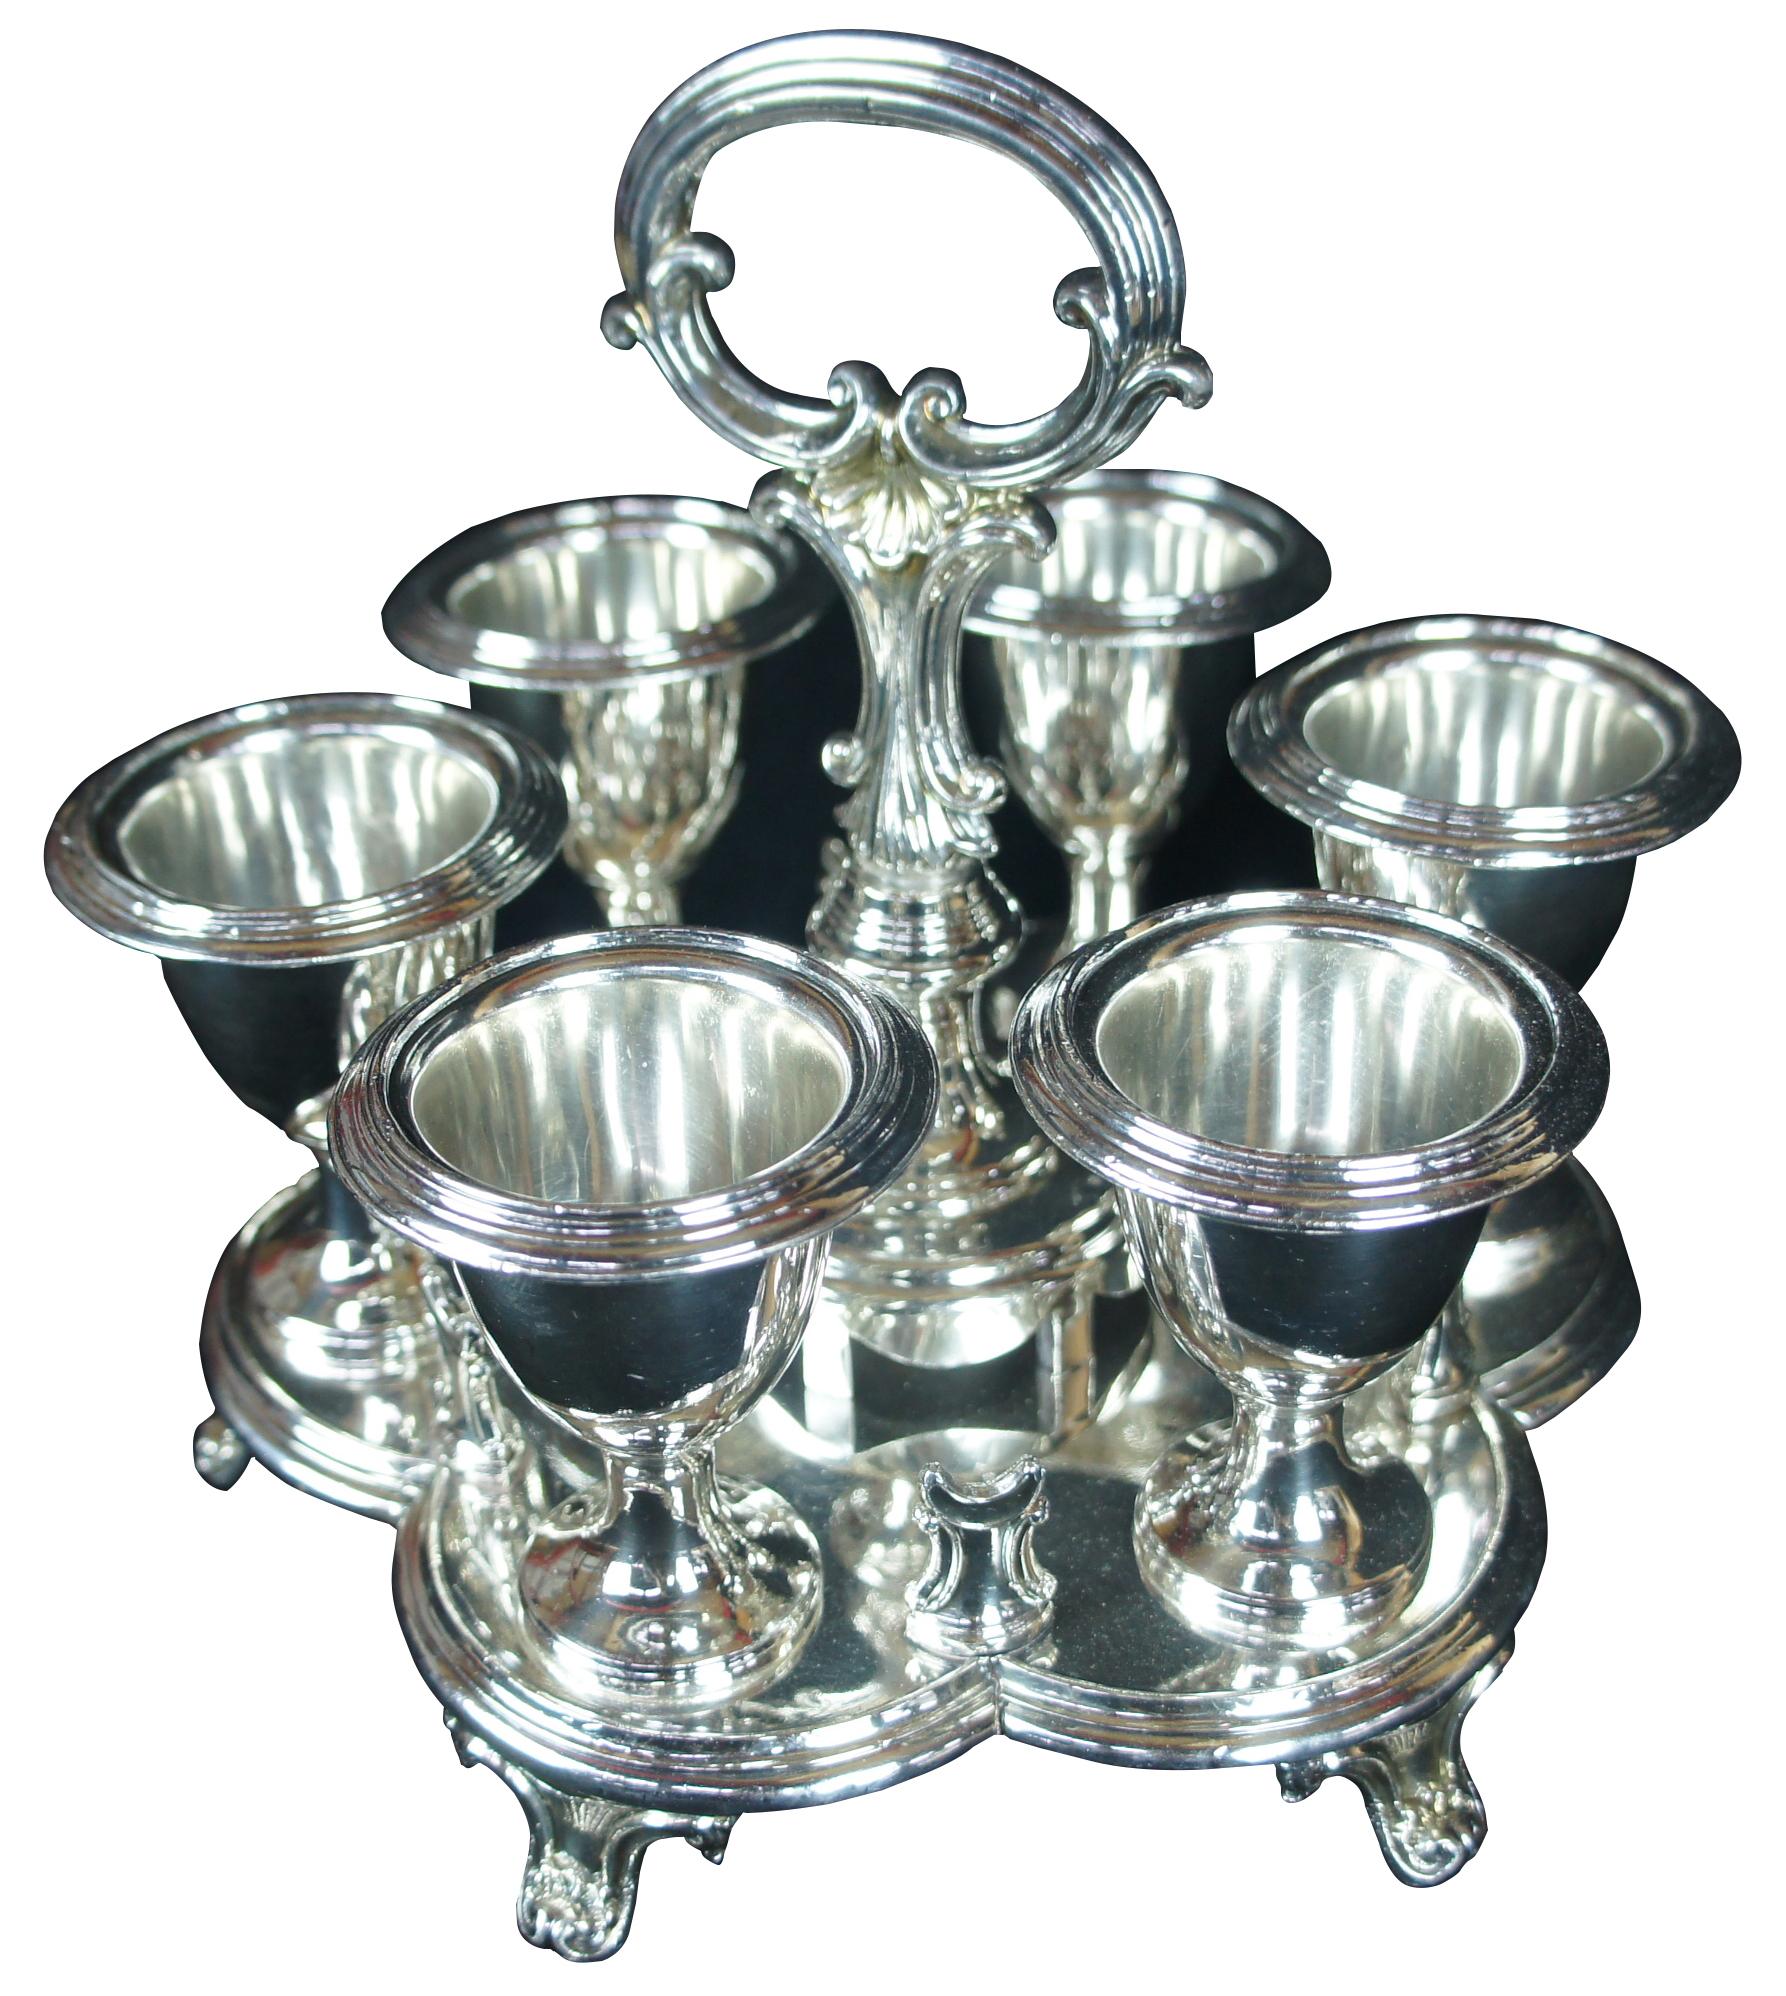 Vintage silver plated kiddish cups and caddy. Features baroque design with scalloped footed form and fitted glasses for ease of use.

Measures: 8